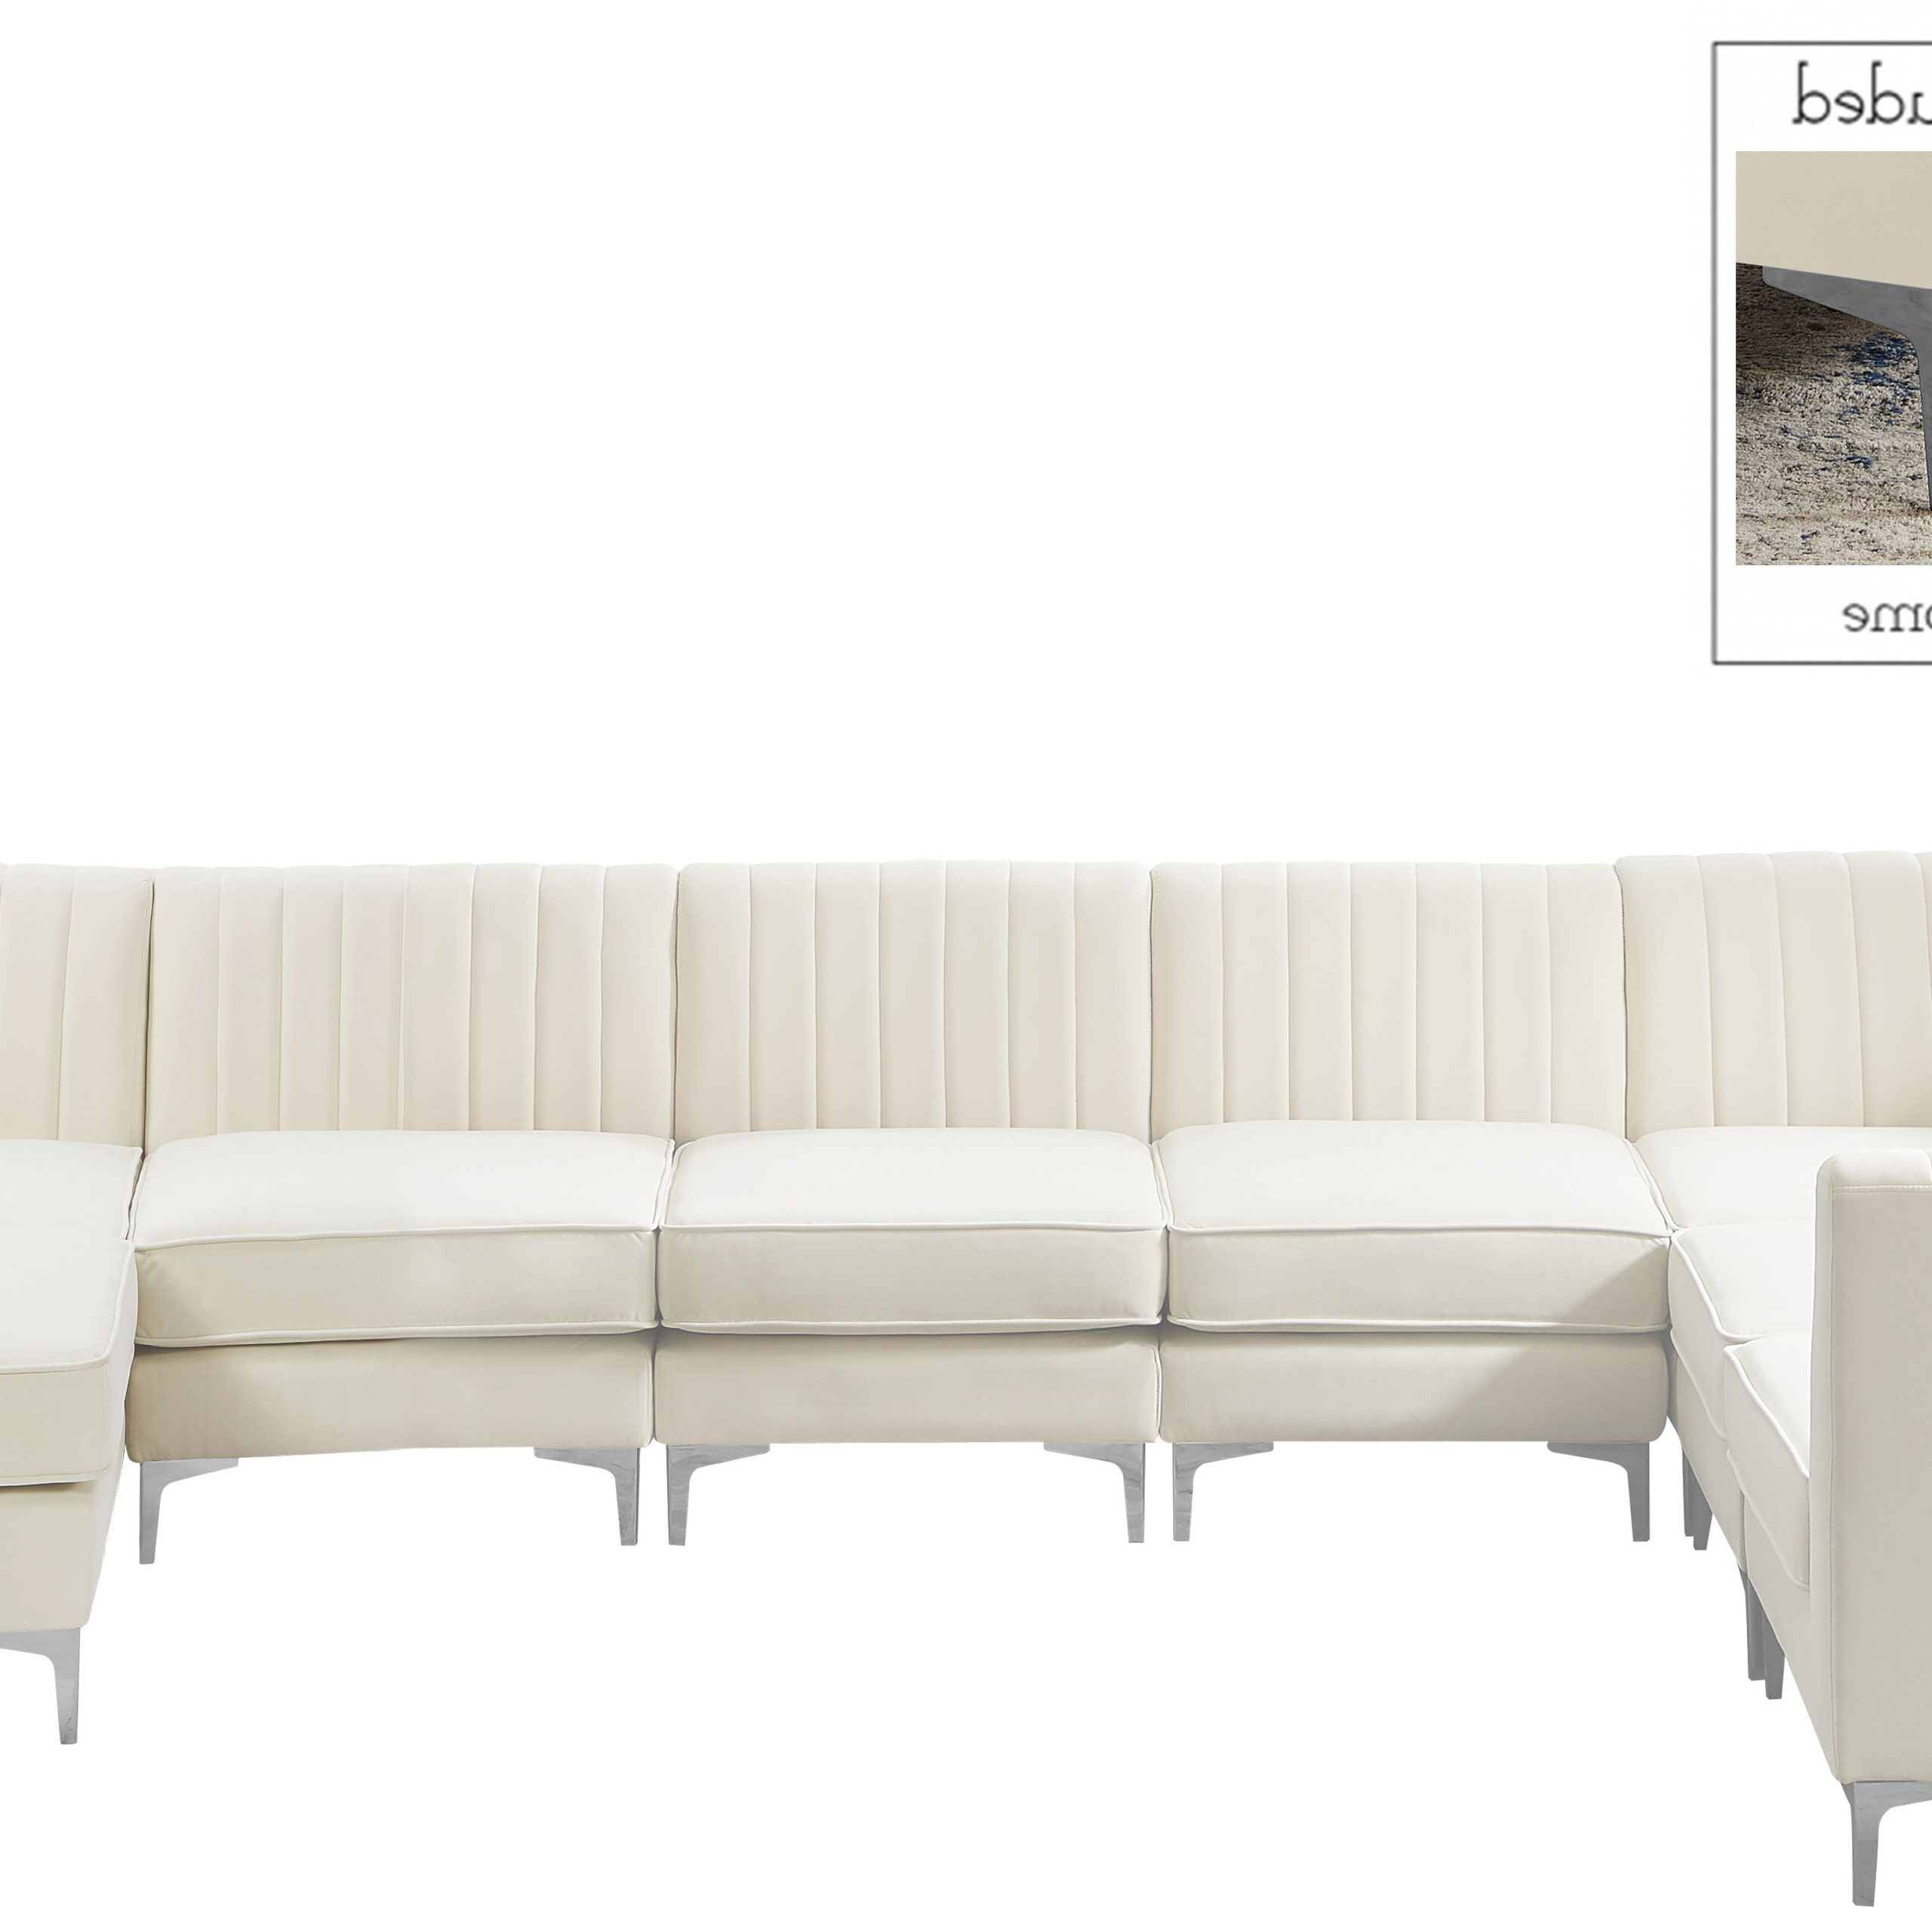 Alina Cream Velvet Modular Sectional – New Lots Furniture Online Store Throughout Most Popular Cream Velvet Modular Sectionals (View 5 of 15)